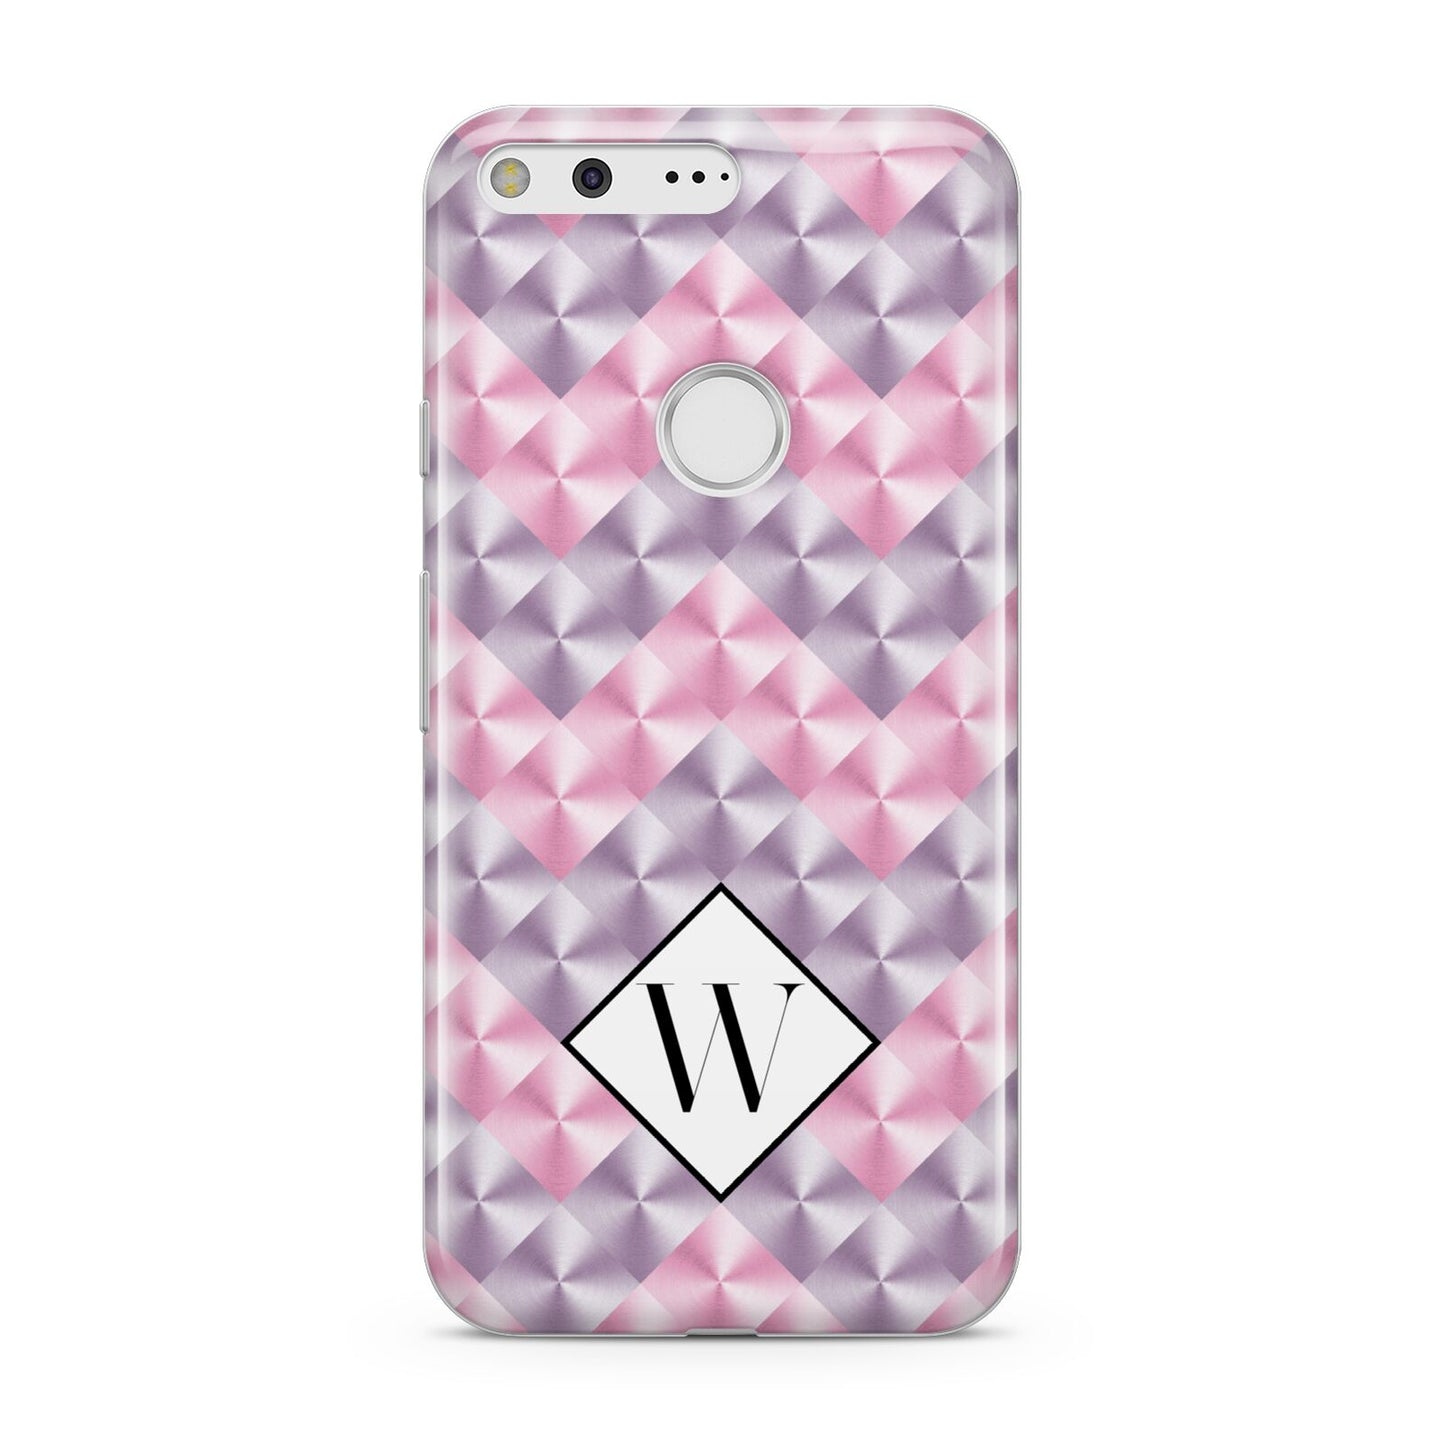 Personalised Mother Of Pearl Monogram Letter Google Pixel Case